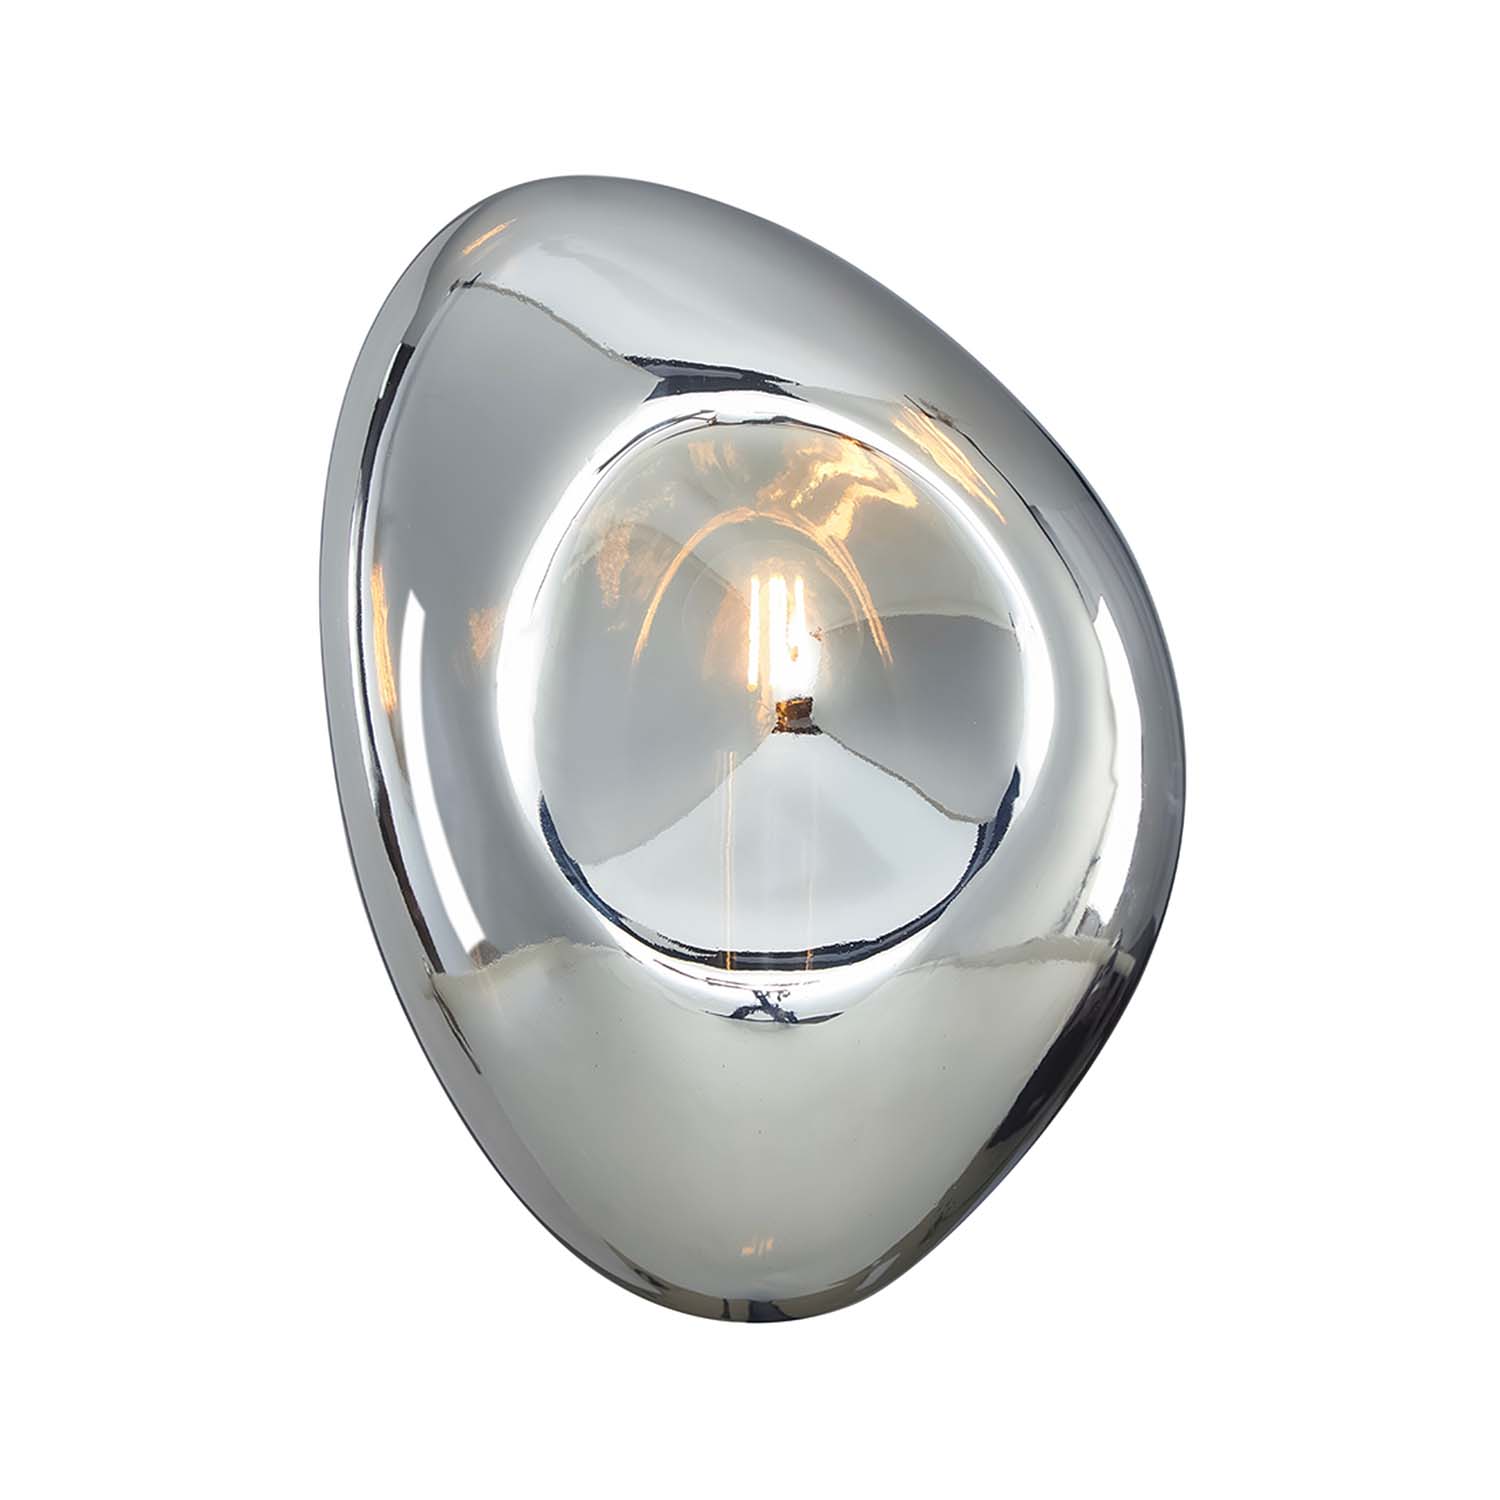 MABELL - Art deco one-way glass wall light